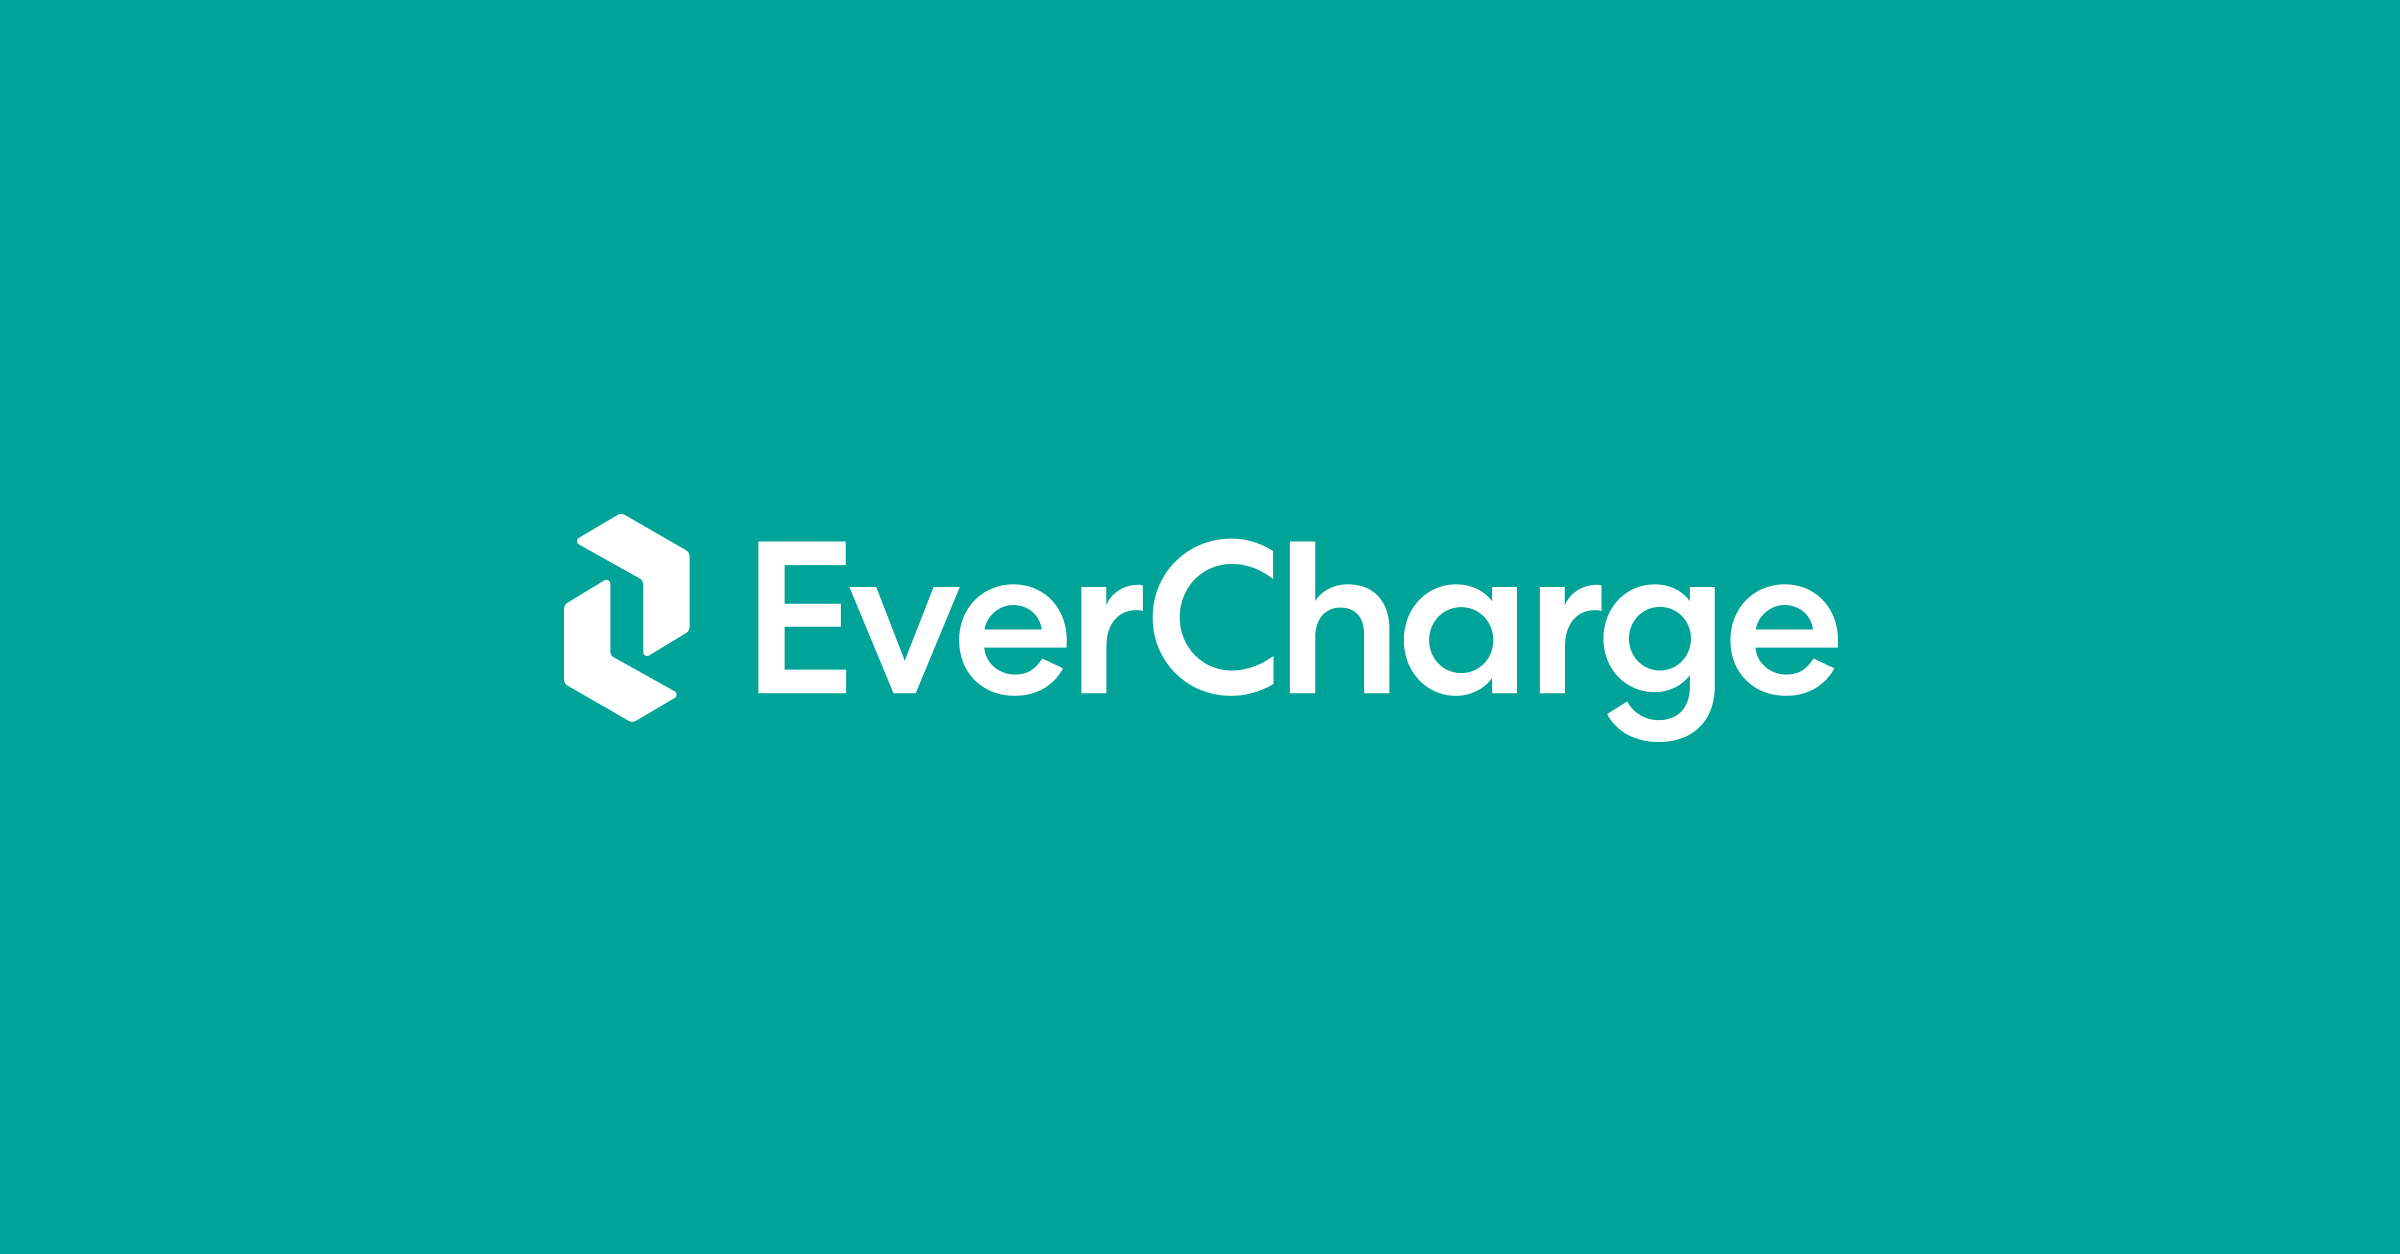 EverCharge Commends Ford and GM for the Move to Use Tesla’s NACS Charging Port; Will Fully Support NACS Throughout the EverCharge Network